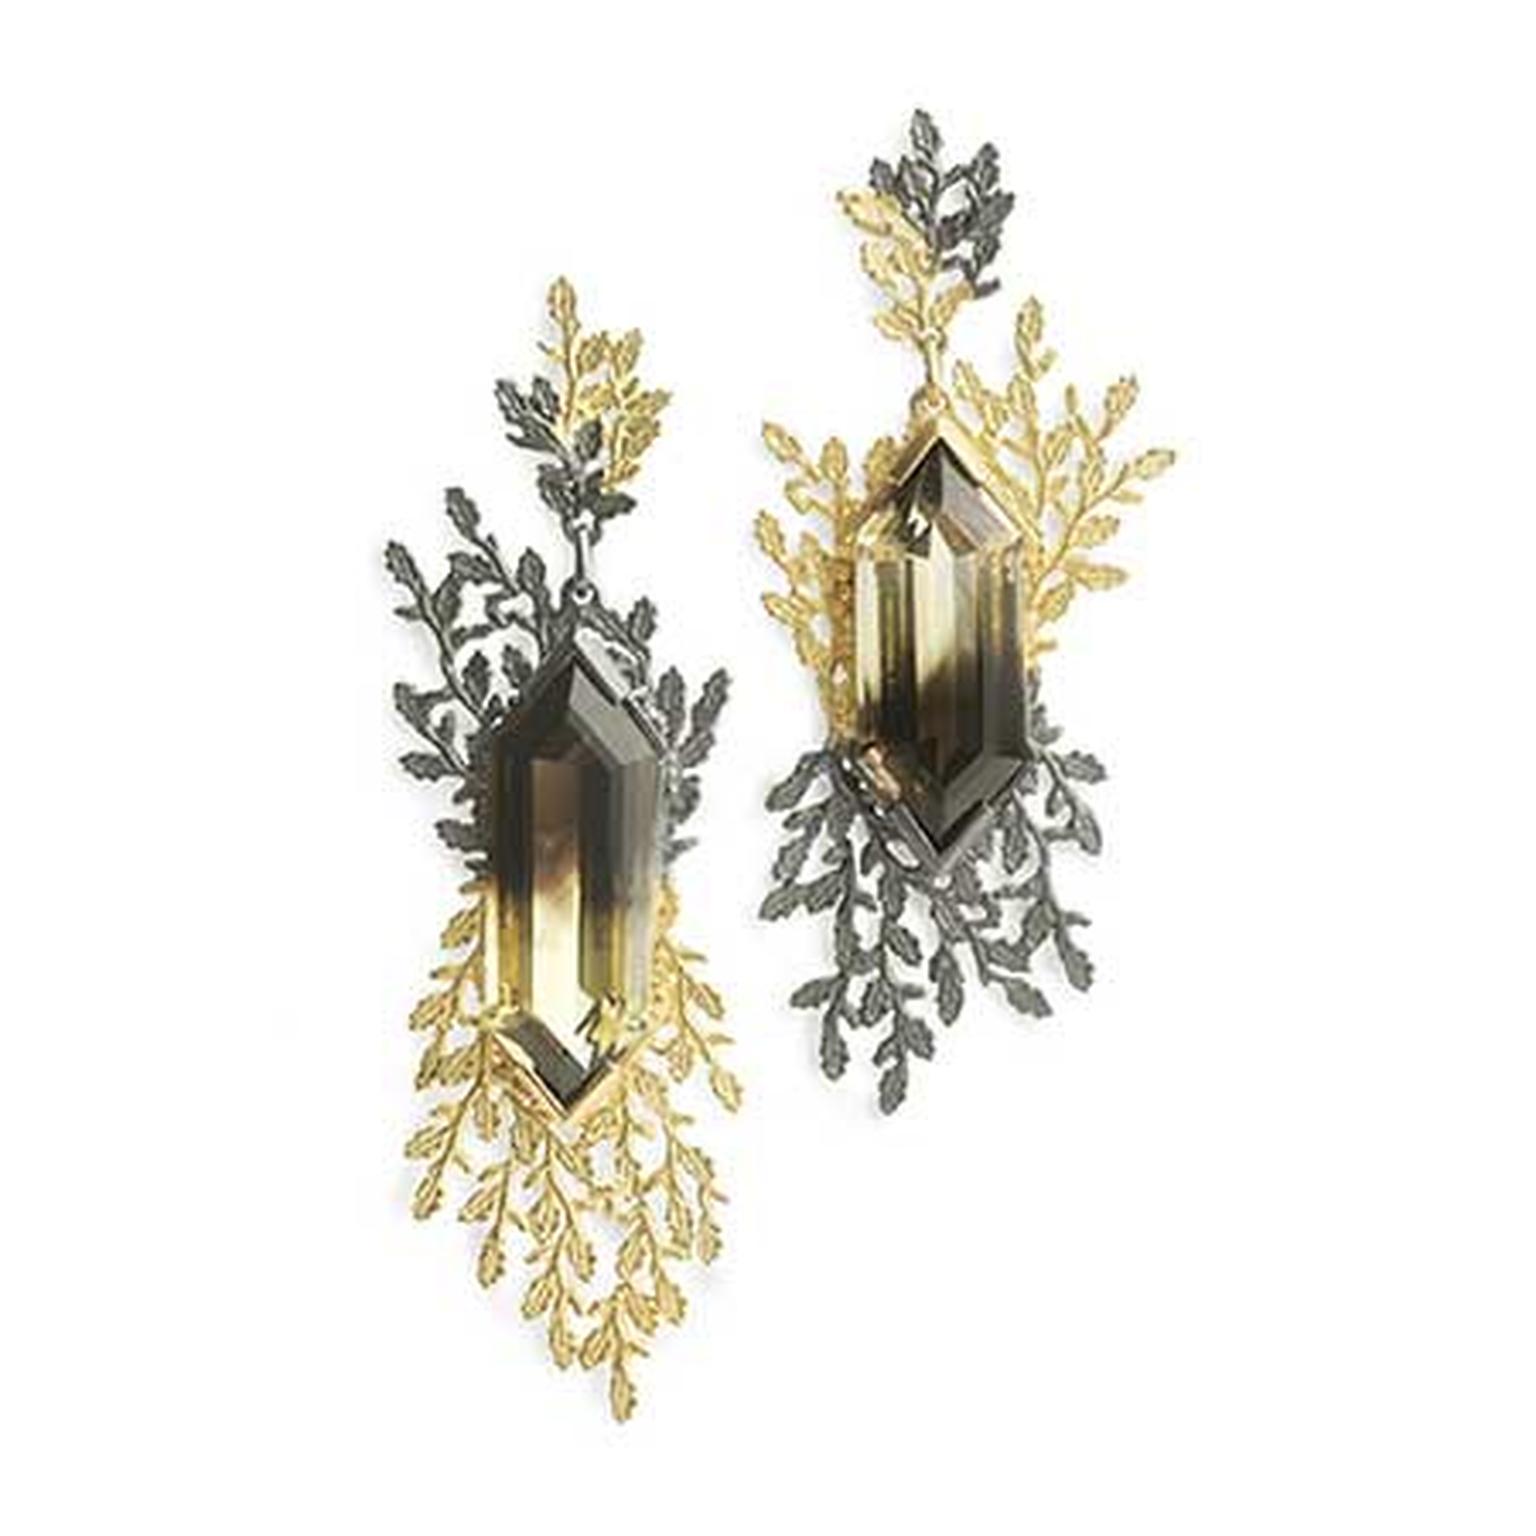 Beth Gilmour one-of-a-kind Diachroma earrings in yellow gold with bi-coloured citrines.